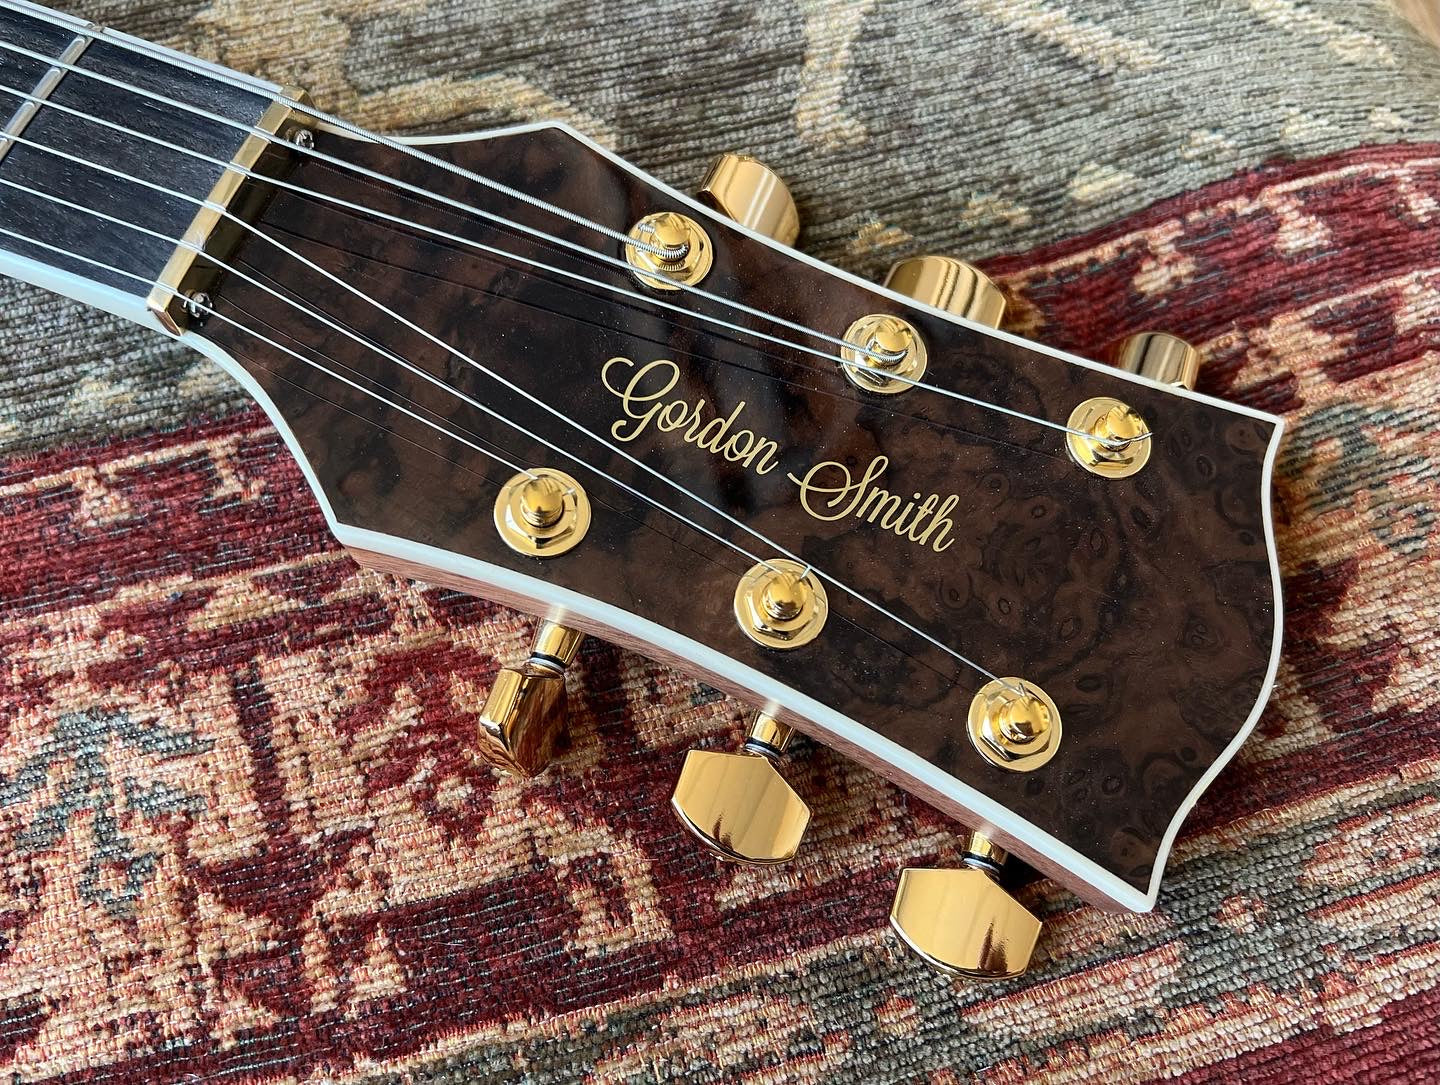 Gordon Smith GS HB P90 Deluxe Burled Walnut Custom, Electric Guitar for sale at Richards Guitars.